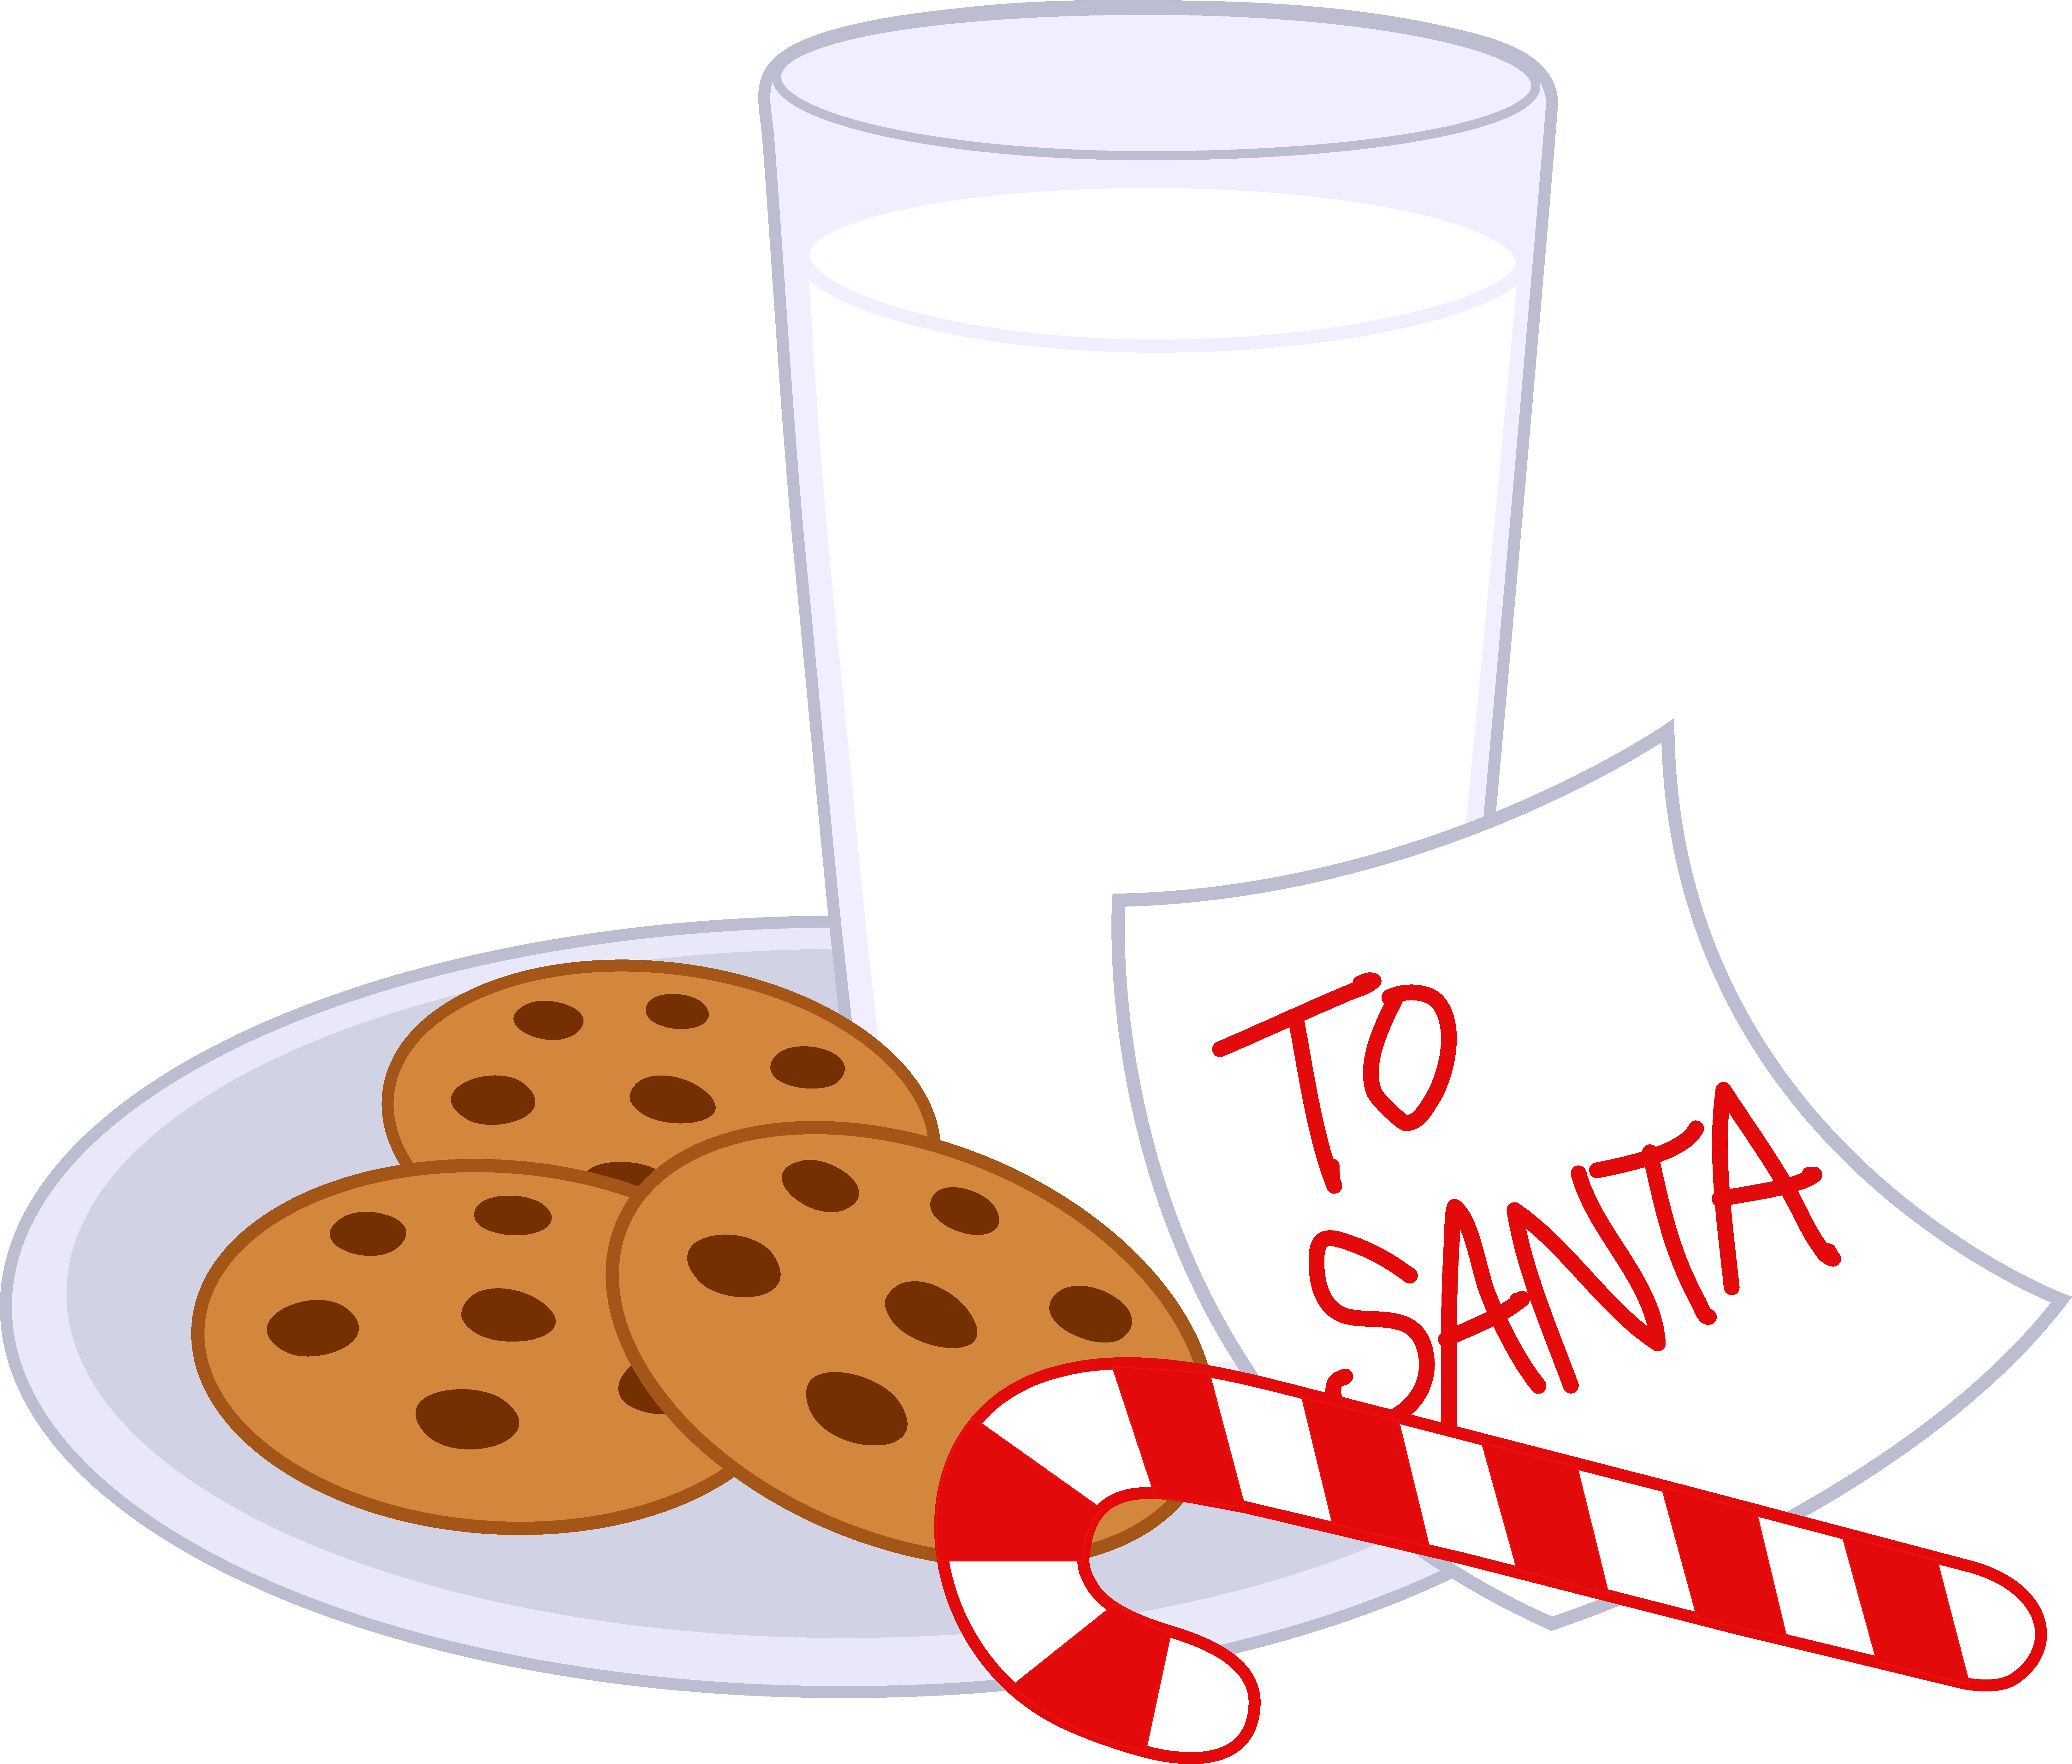 Cookies and for santa. Cookie clipart milk